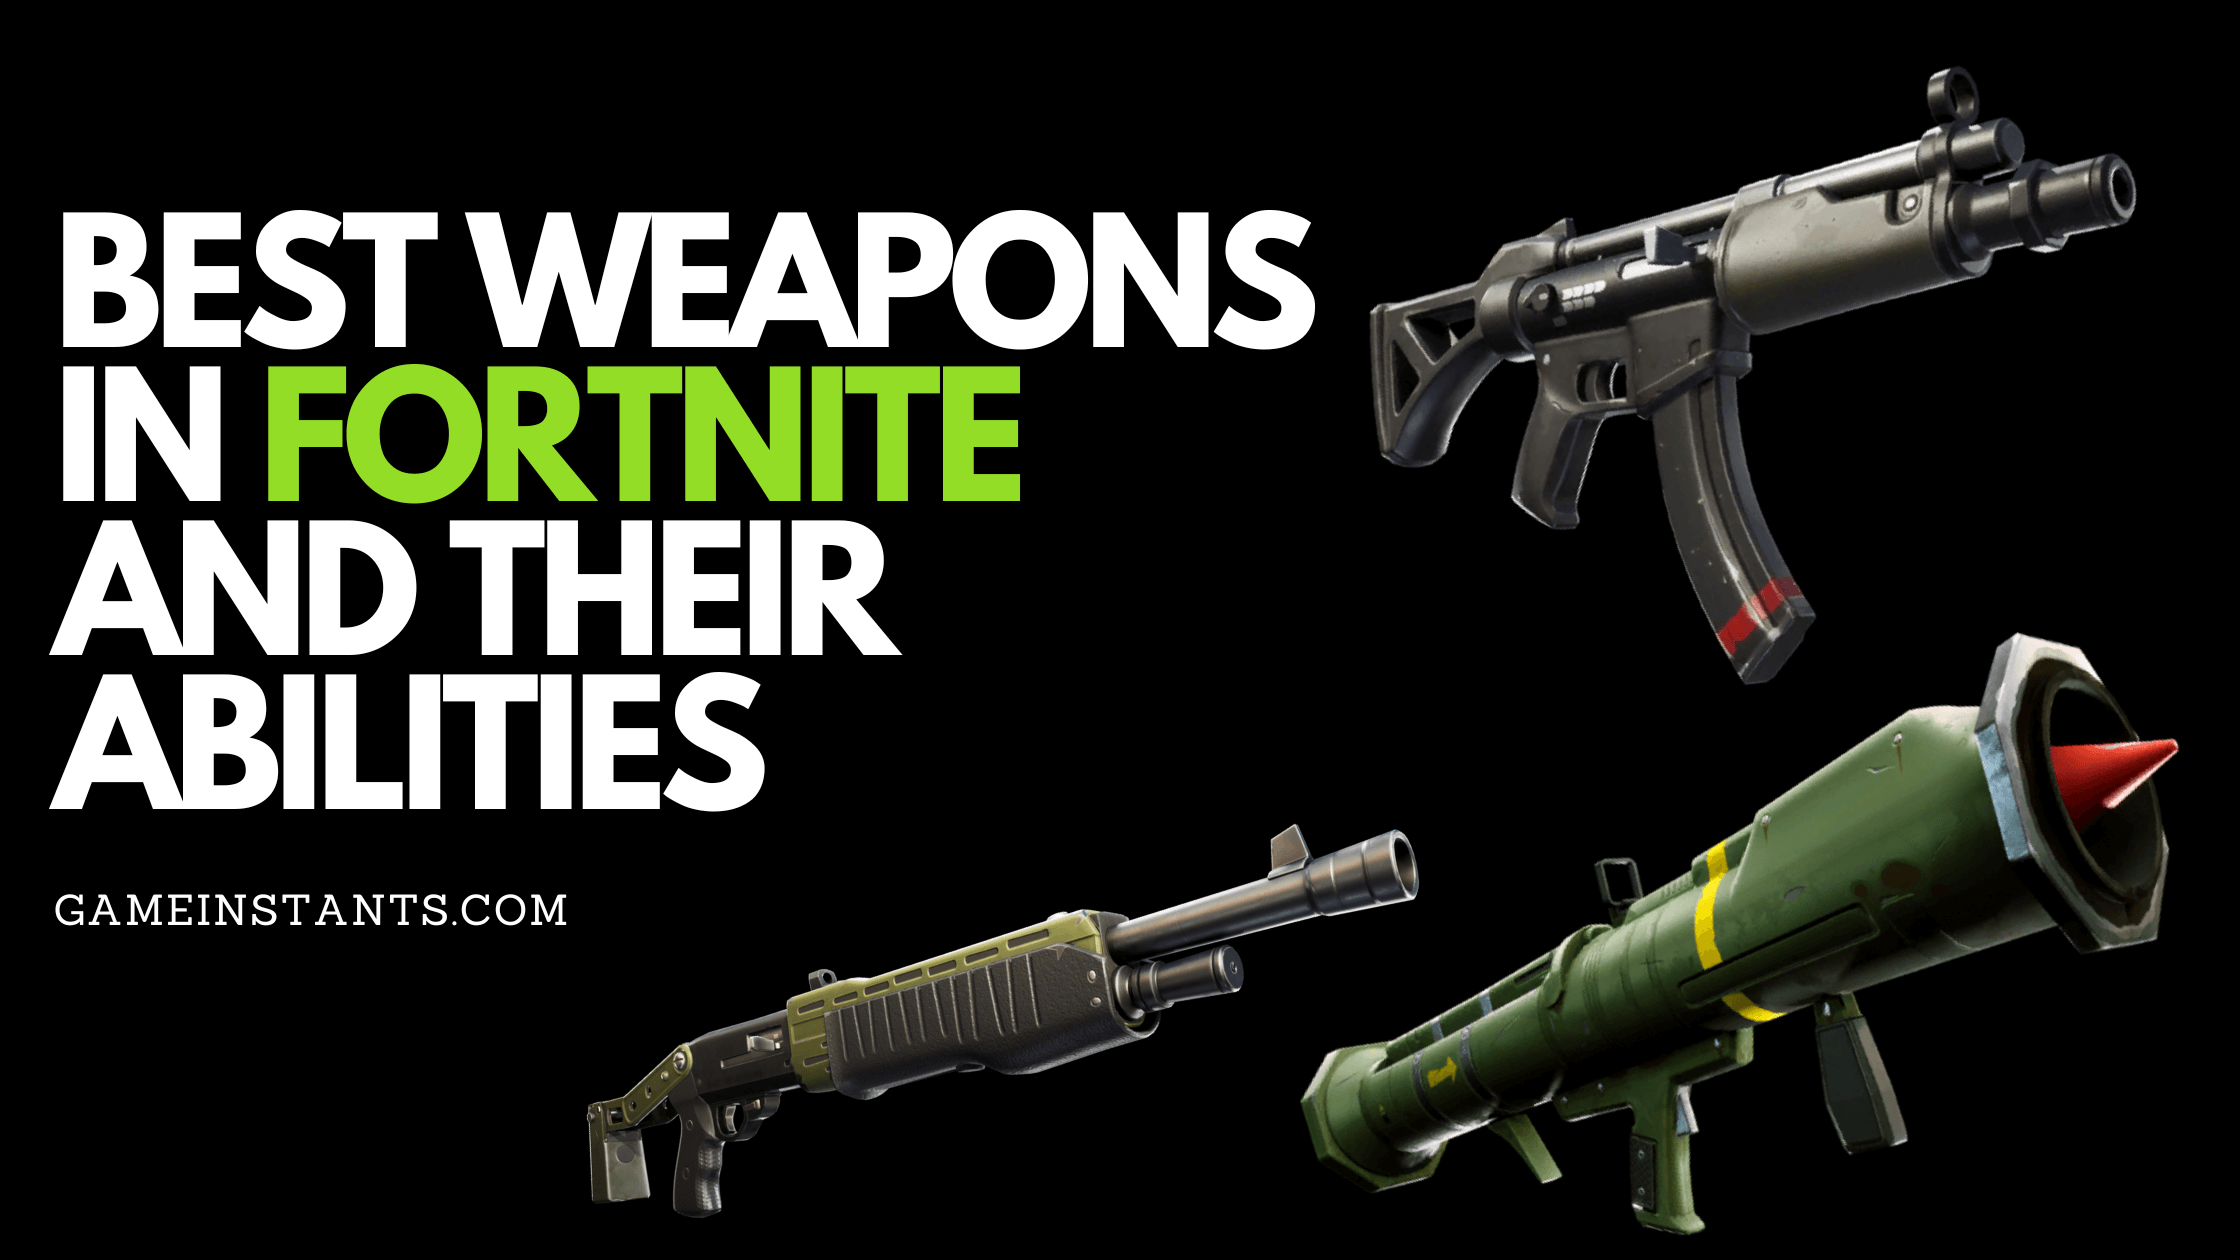 Best Weapons in Fortnite and Their Abilities